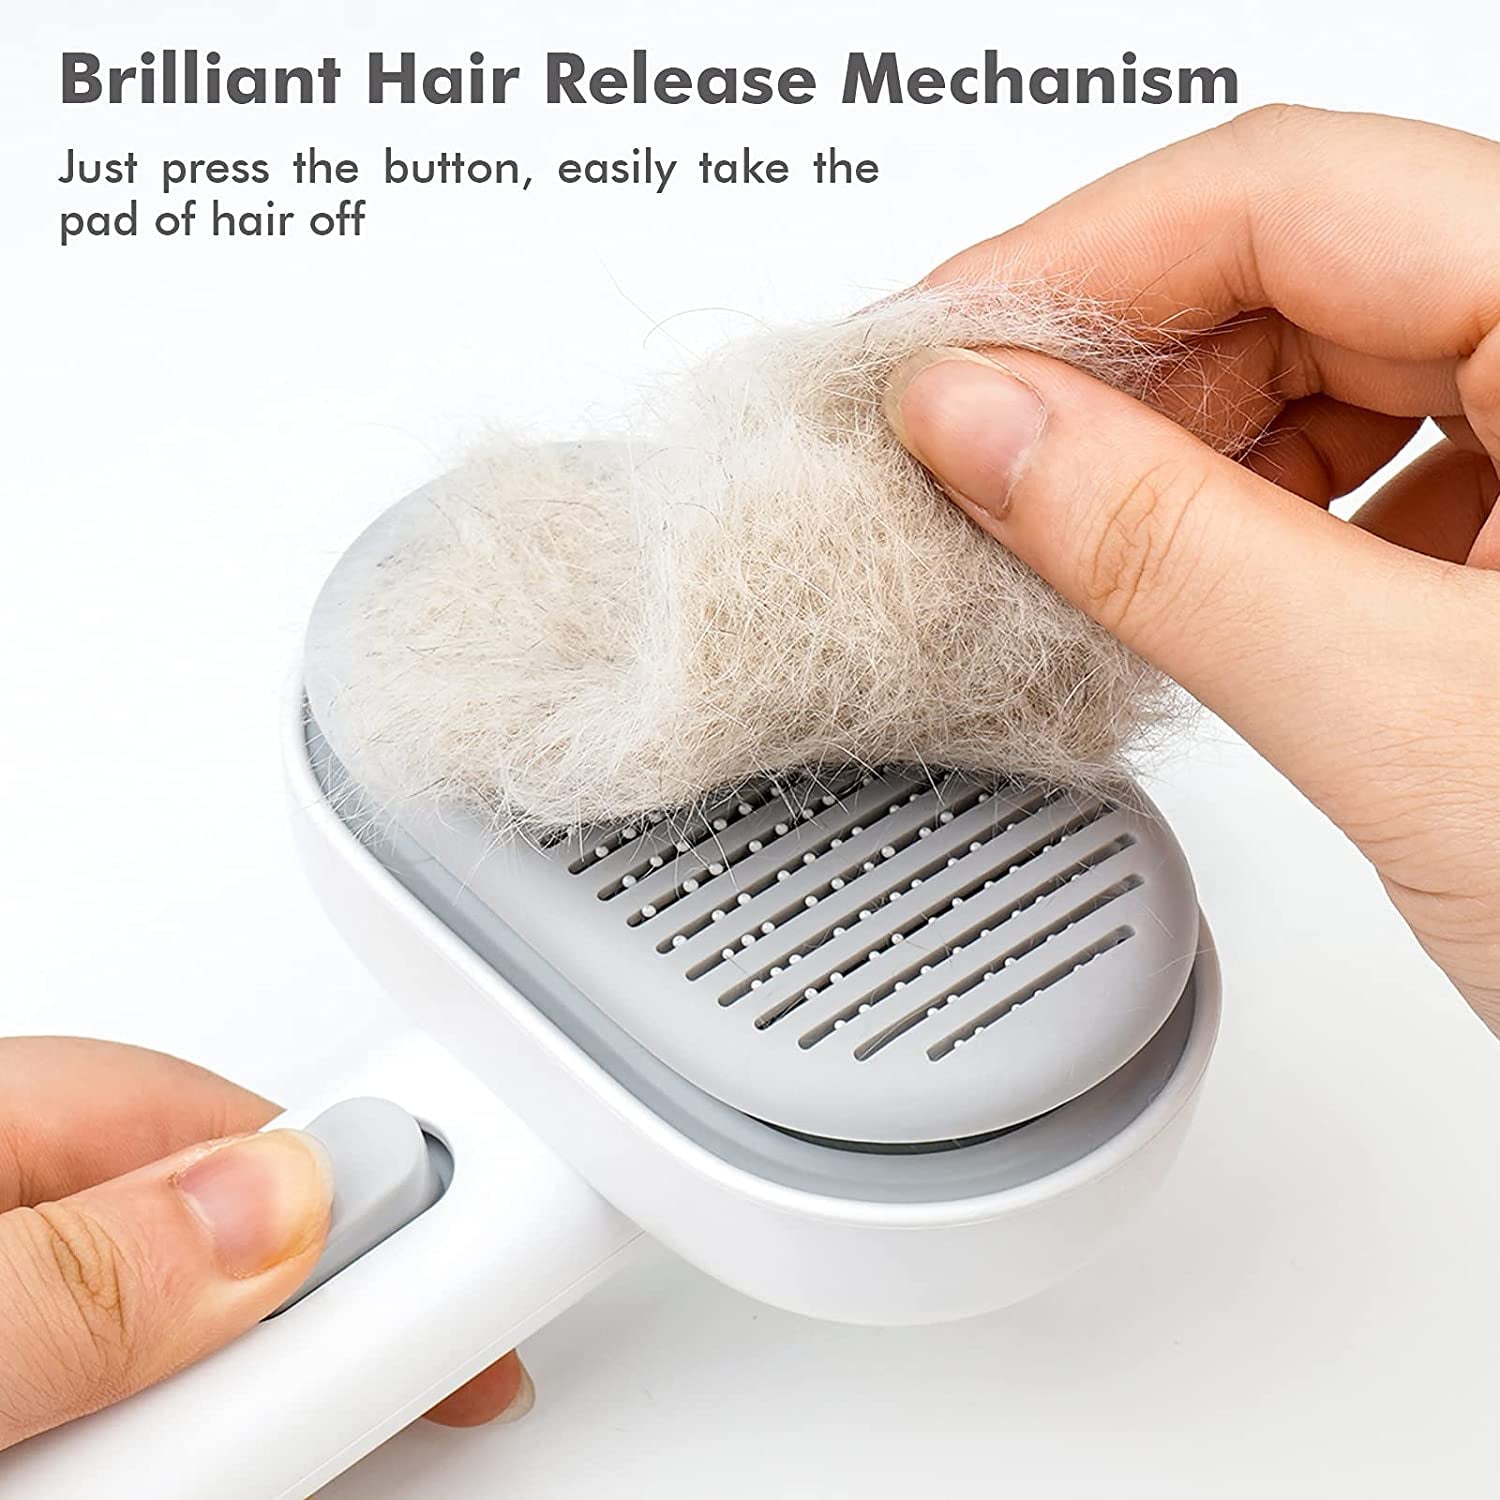 Aumuca Cat Brush with Release Button, Cat Brushes for Indoor Cats Shedding, Cat Brush for Long or Short Haired Cats, Cat Grooming Brush Cat Comb for Kitten Rabbit Massage Removes Loose Fur